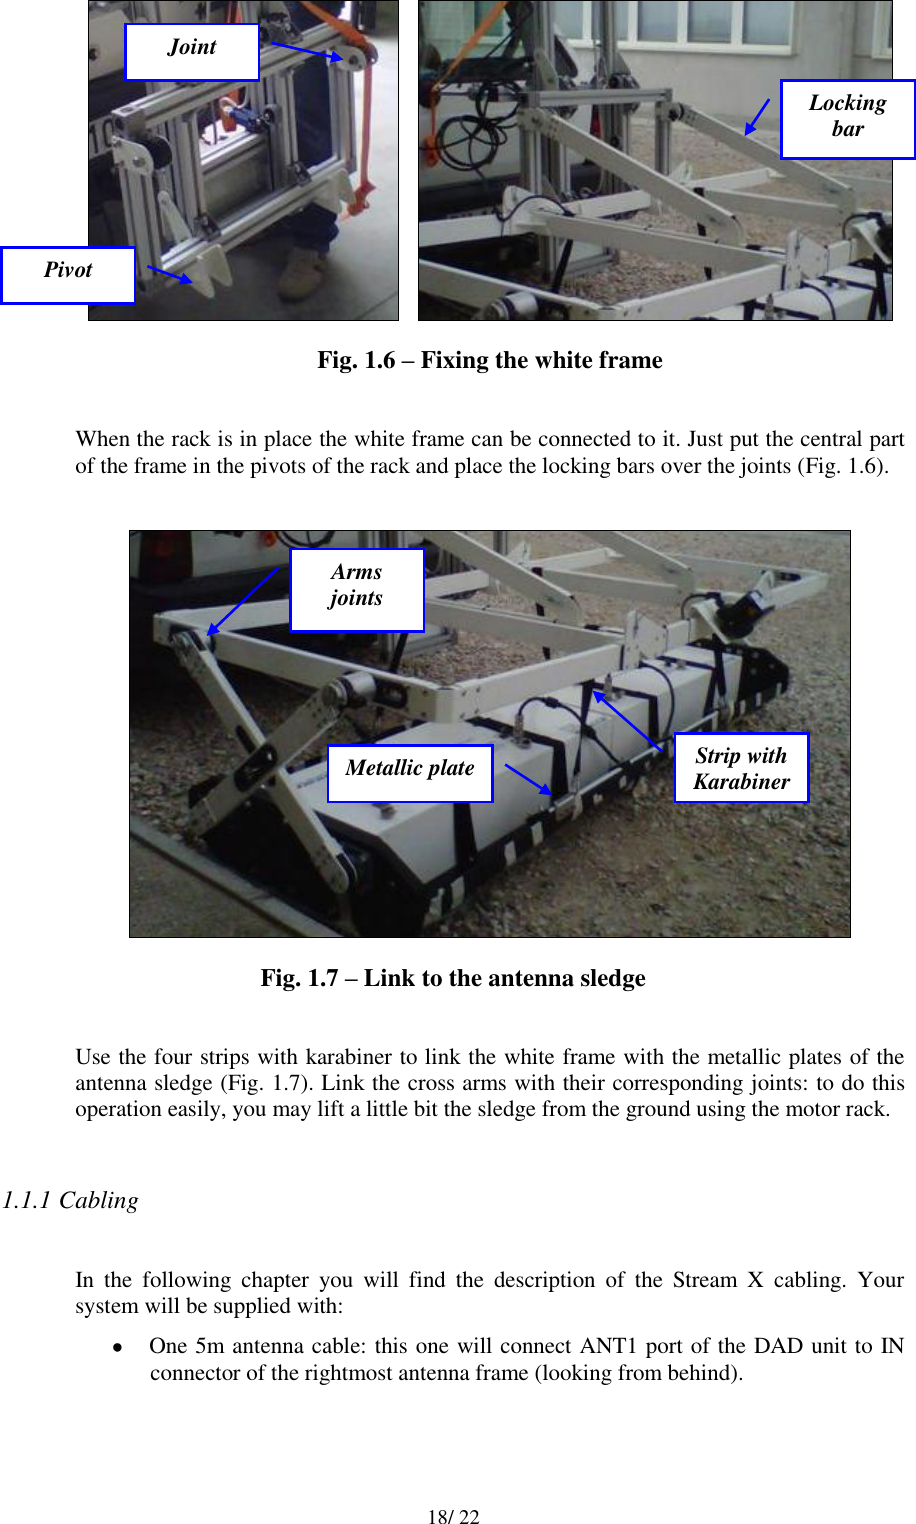   18/ 22      Fig. 1.6 – Fixing the white frame  When the rack is in place the white frame can be connected to it. Just put the central part of the frame in the pivots of the rack and place the locking bars over the joints (Fig. 1.6).   Fig. 1.7 – Link to the antenna sledge  Use the four strips with karabiner to link the white frame with the metallic plates of the antenna sledge (Fig. 1.7). Link the cross arms with their corresponding joints: to do this operation easily, you may lift a little bit the sledge from the ground using the motor rack.  1.1.1 Cabling  In  the  following  chapter  you  will  find  the  description  of  the  Stream  X  cabling.  Your system will be supplied with:  One 5m antenna cable: this one will connect ANT1 port of the DAD unit to IN connector of the rightmost antenna frame (looking from behind). Pivot Locking bar Joint Strip with Karabiner Metallic plate Arms joints 